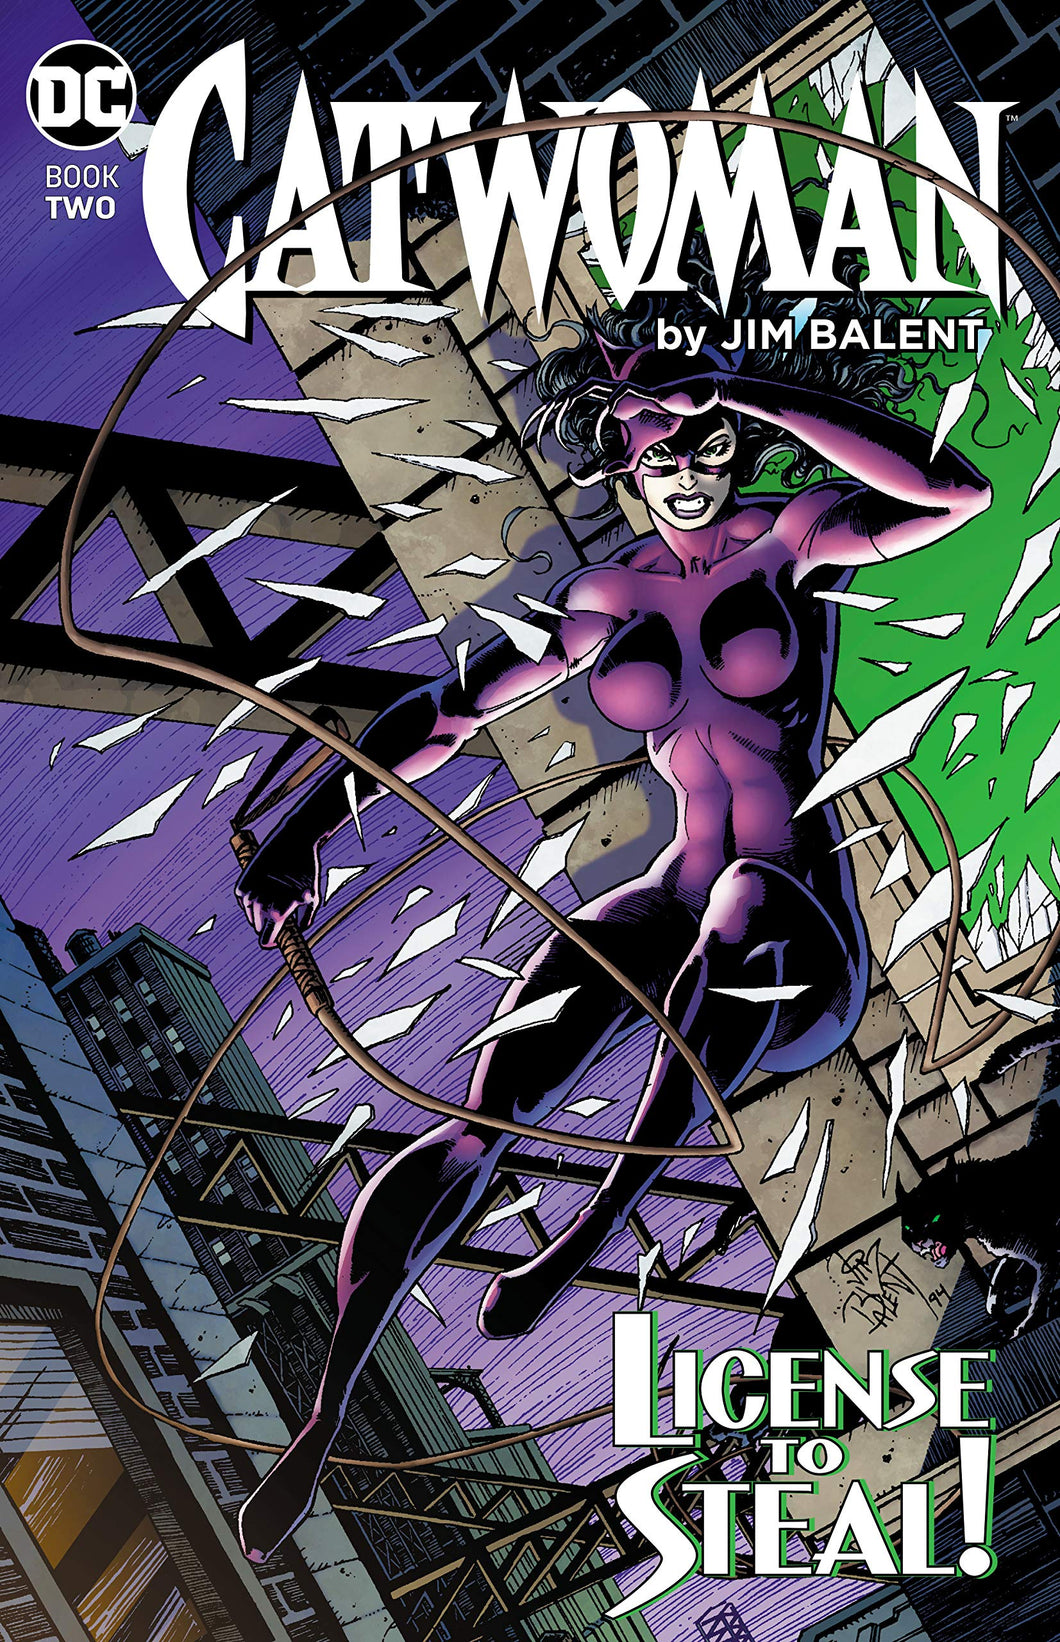 Catwoman by Jim Balent Vol. 2 : License To Steal